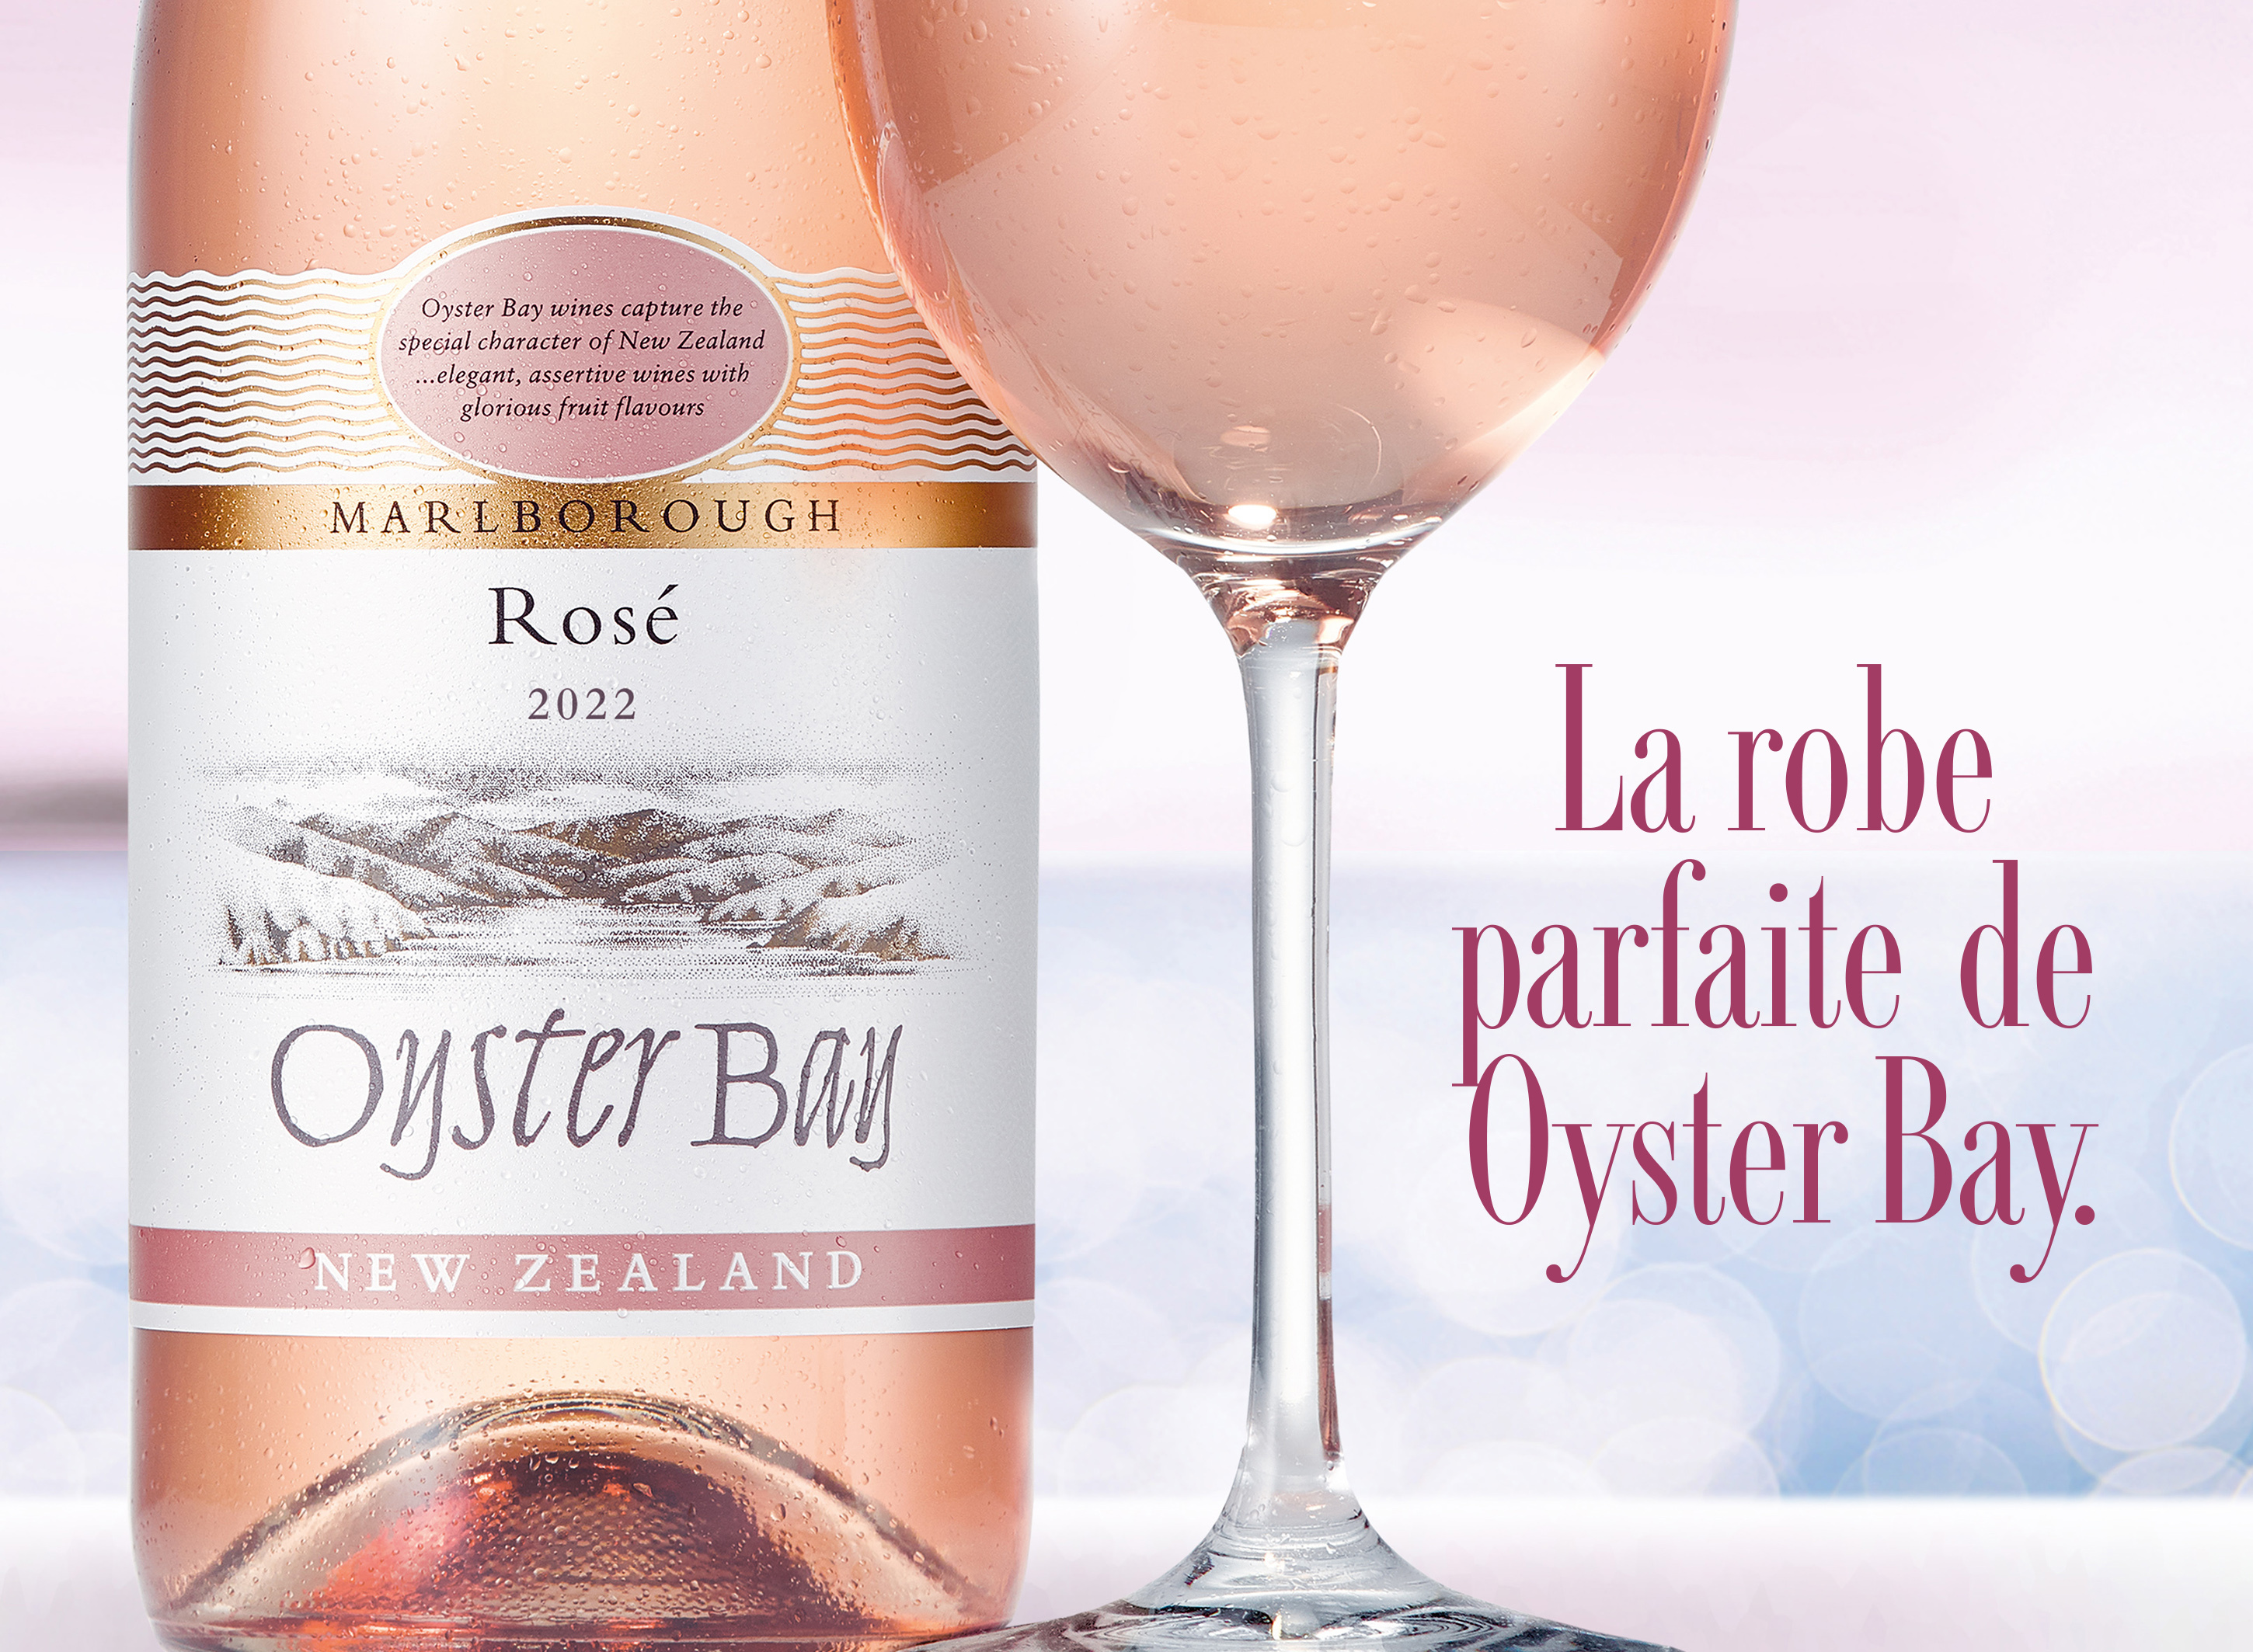 Oyster Bay Marlborough New Zealand Rosé Wine bottle and glass French